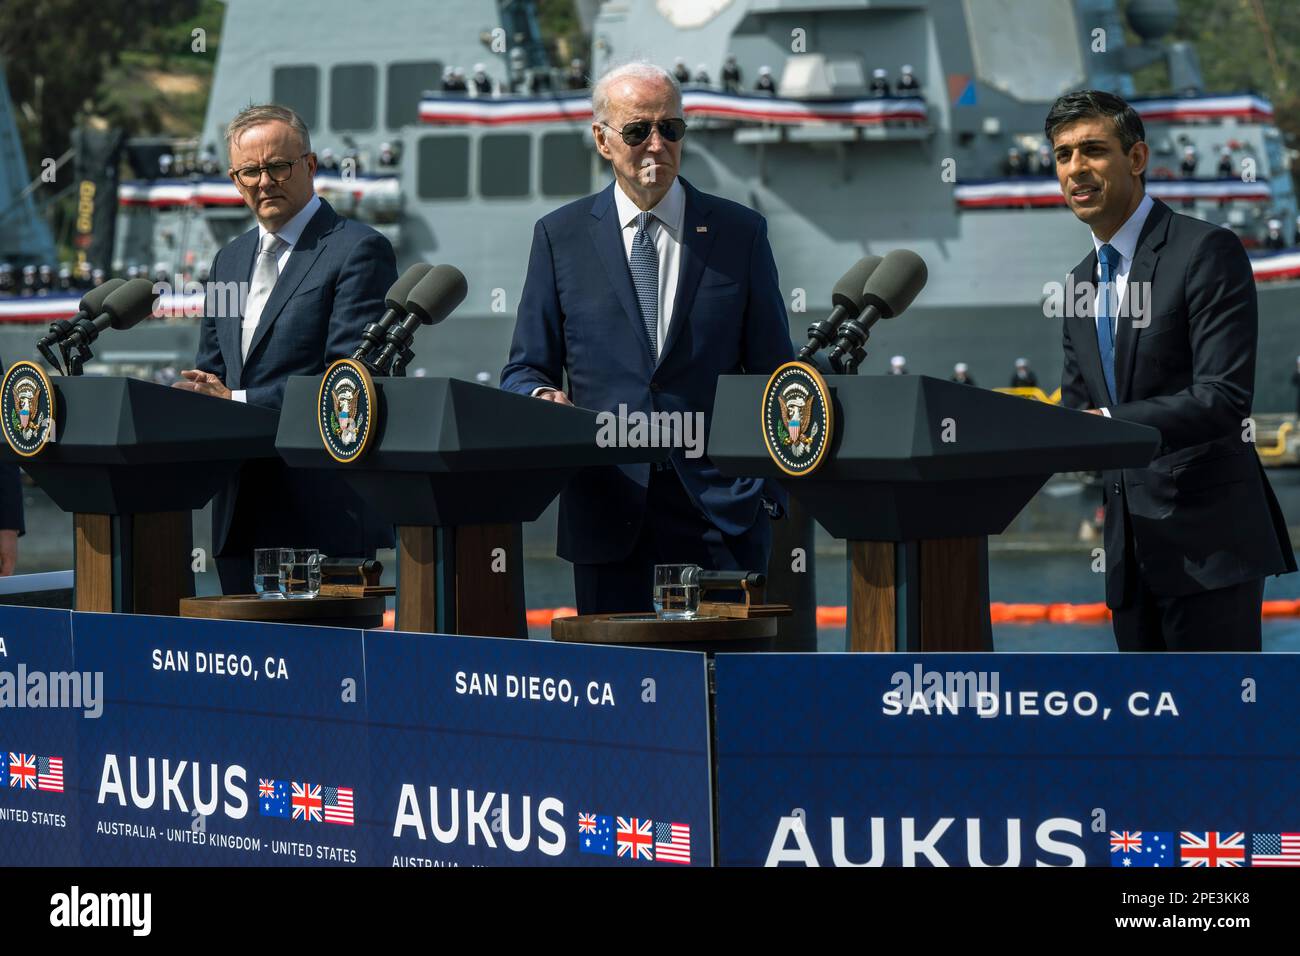 San Diego, United States of America. 13 March, 2023. British Prime Minister Rishi Sunak, right, responds to a question as U.S President Joe Biden, center,  and Australian Prime Minister Anthony Albanese, left, look on during a press conference following their trilateral meeting at Point Loma naval base, March 13, 2023 in San Diego, California.  Credit: Chad McNeeley/DoD Photo/Alamy Live News Stock Photo